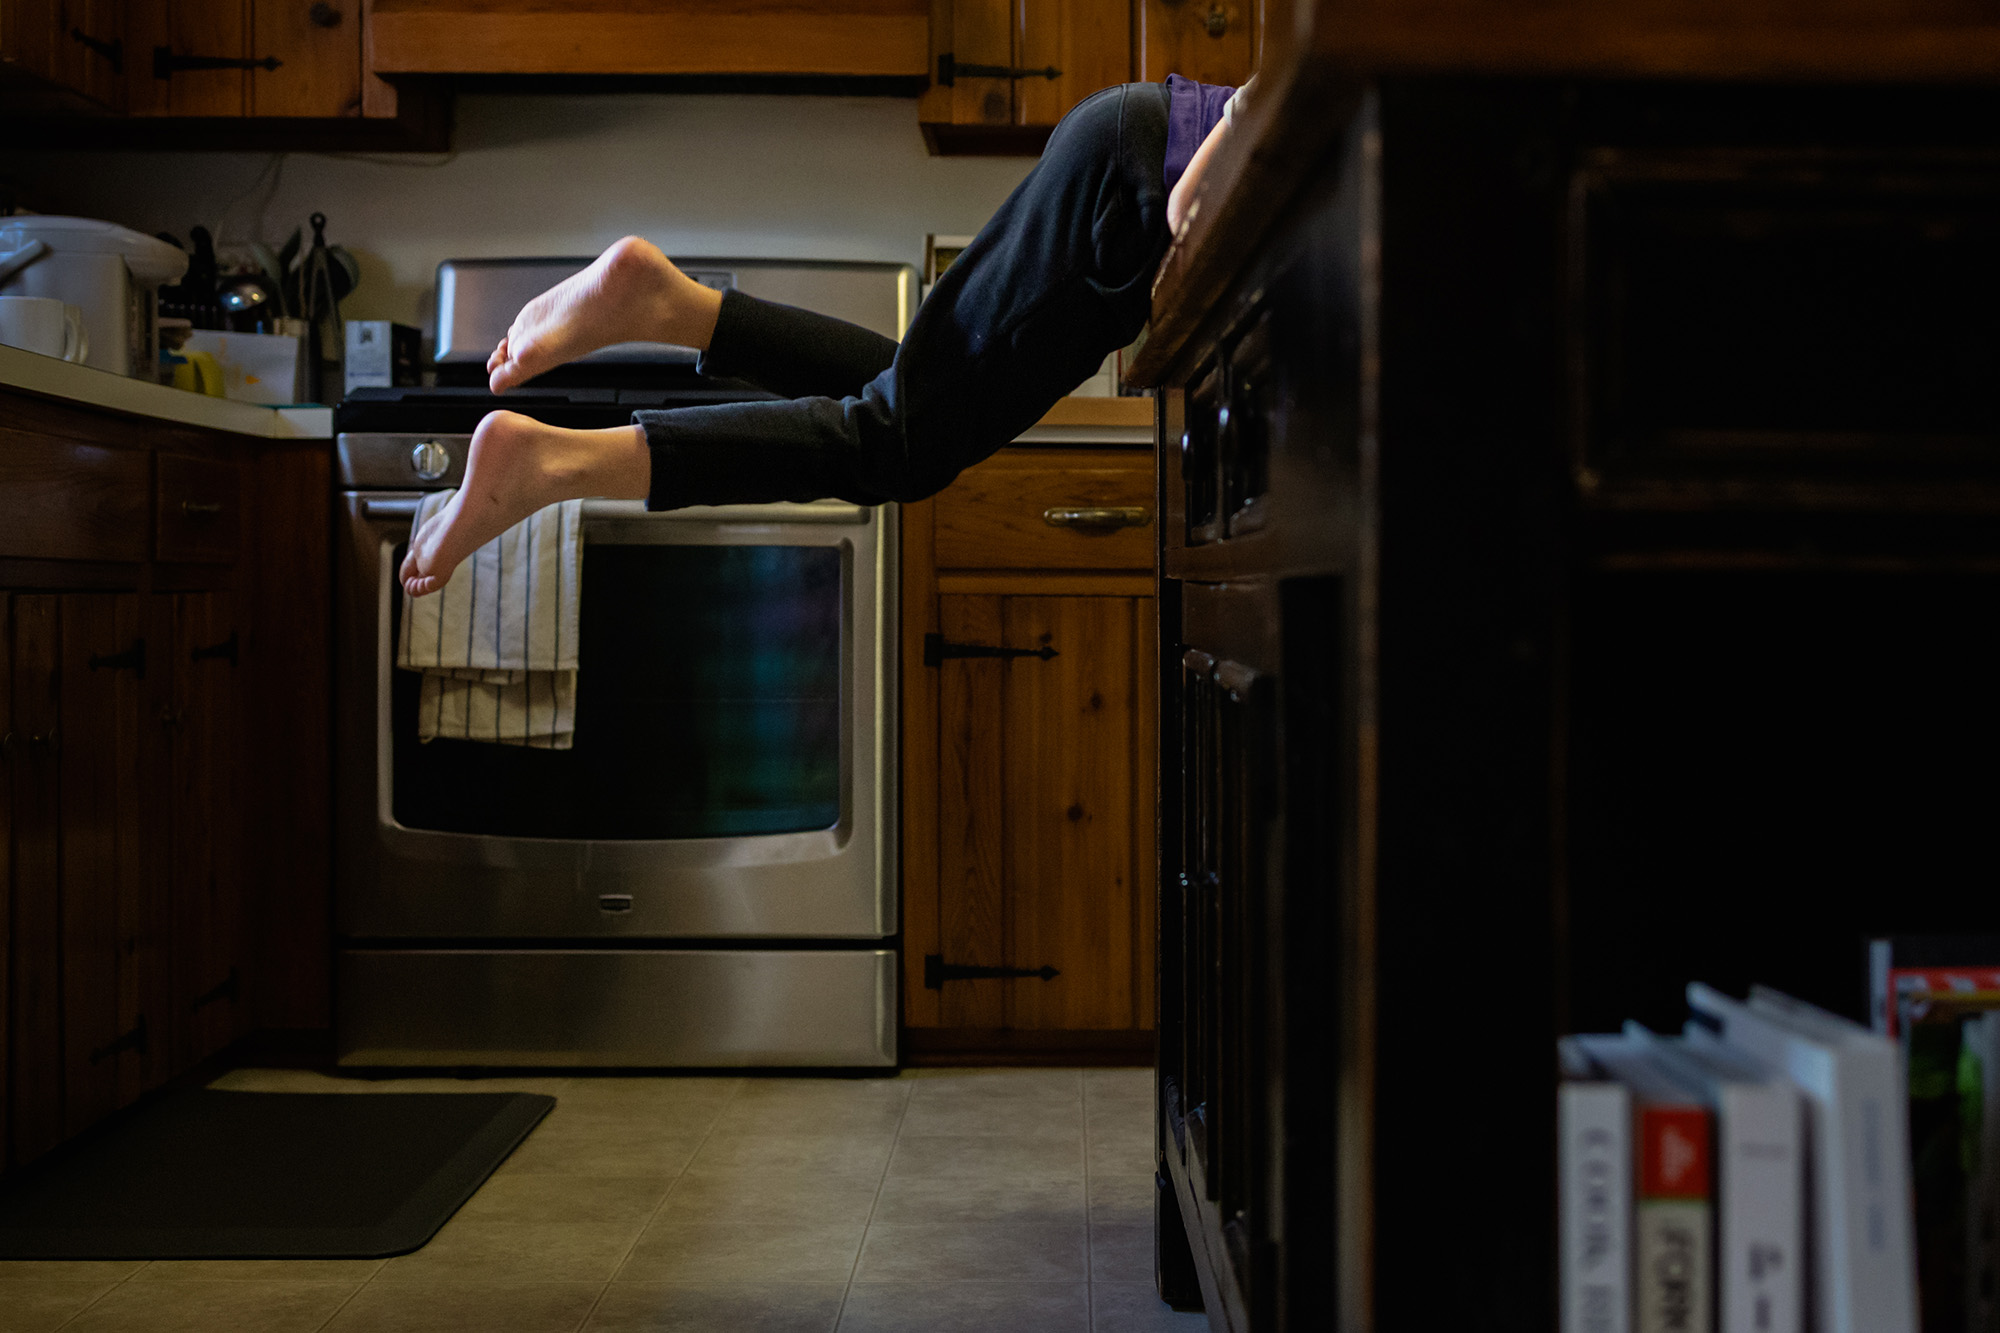 Finding Inspiration Indoors: Child climbing on counter